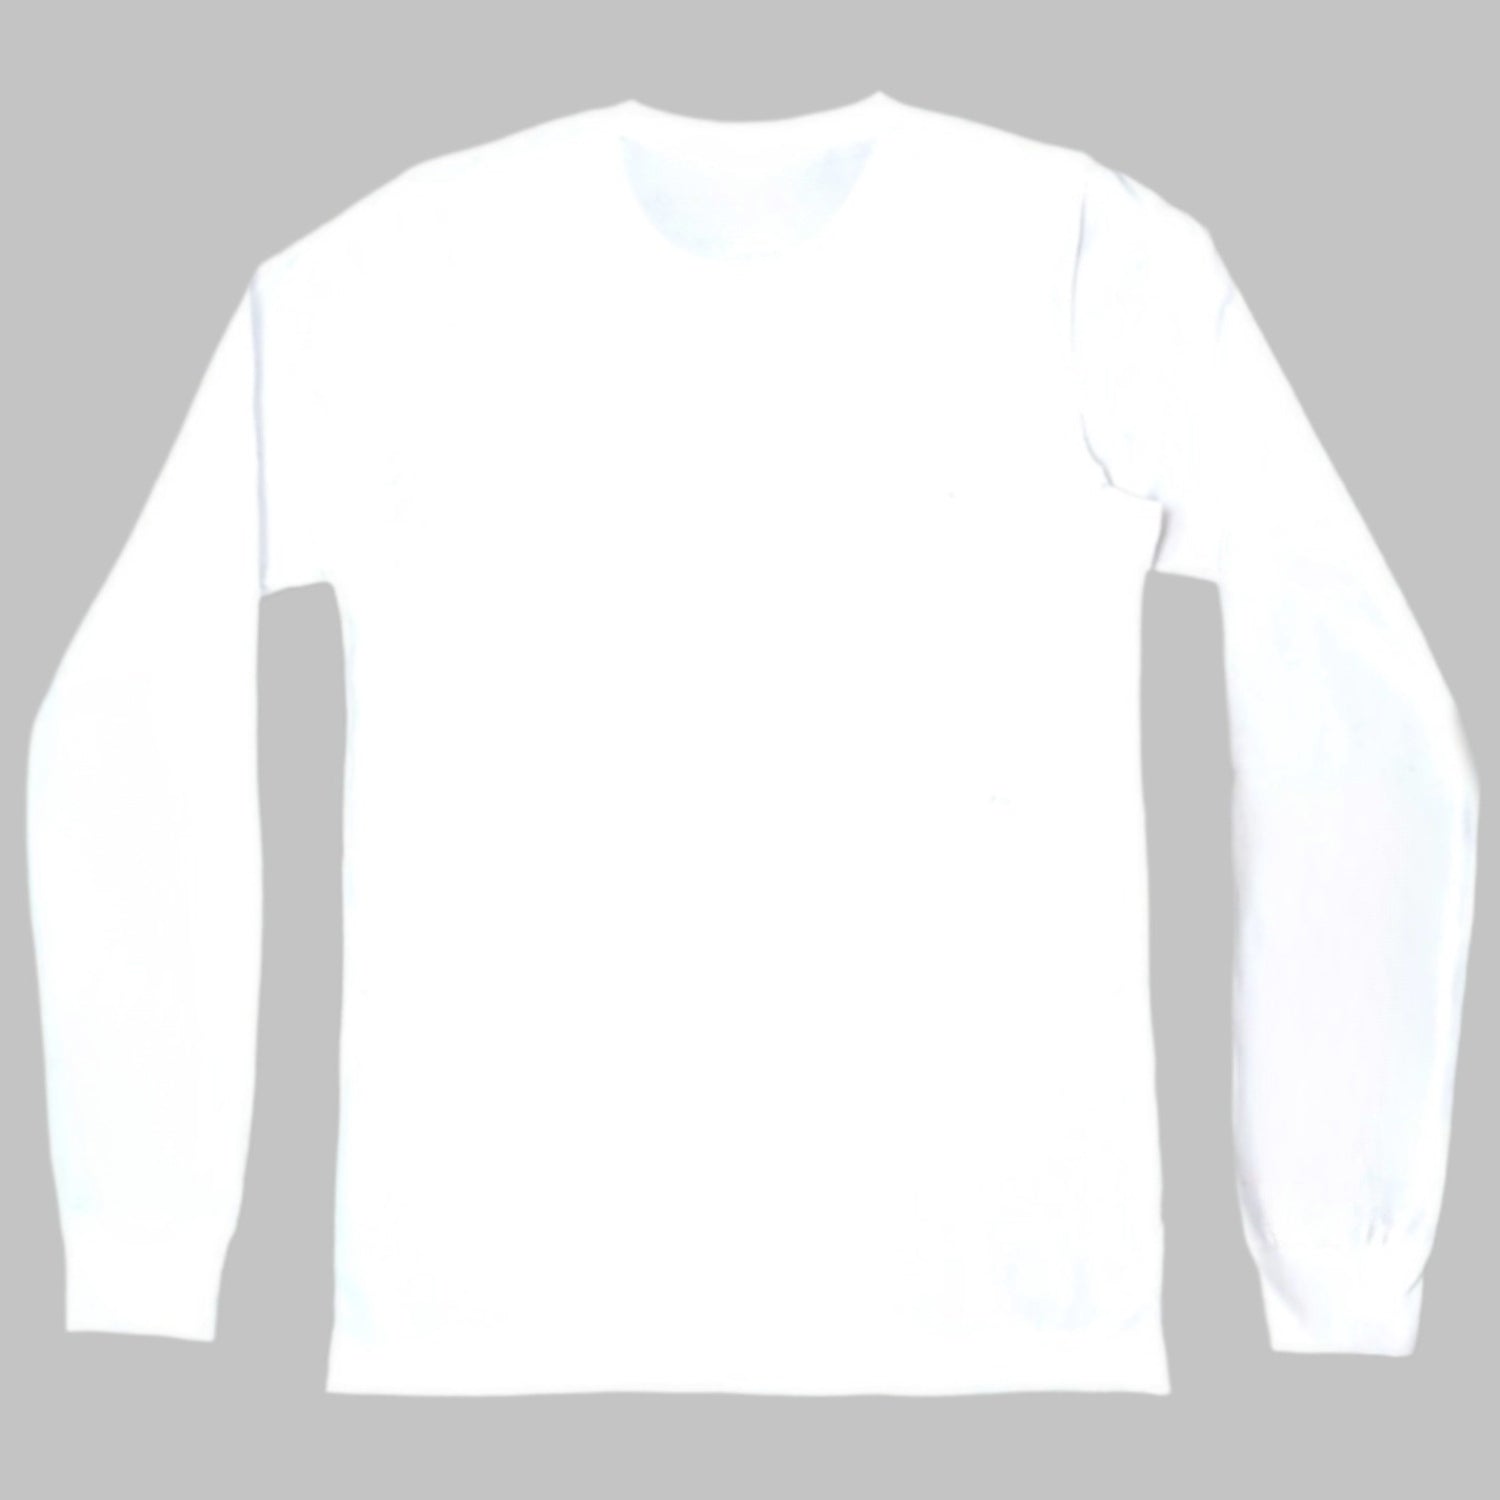 Wave Perfected by Love White Back Long Sleeve Tee